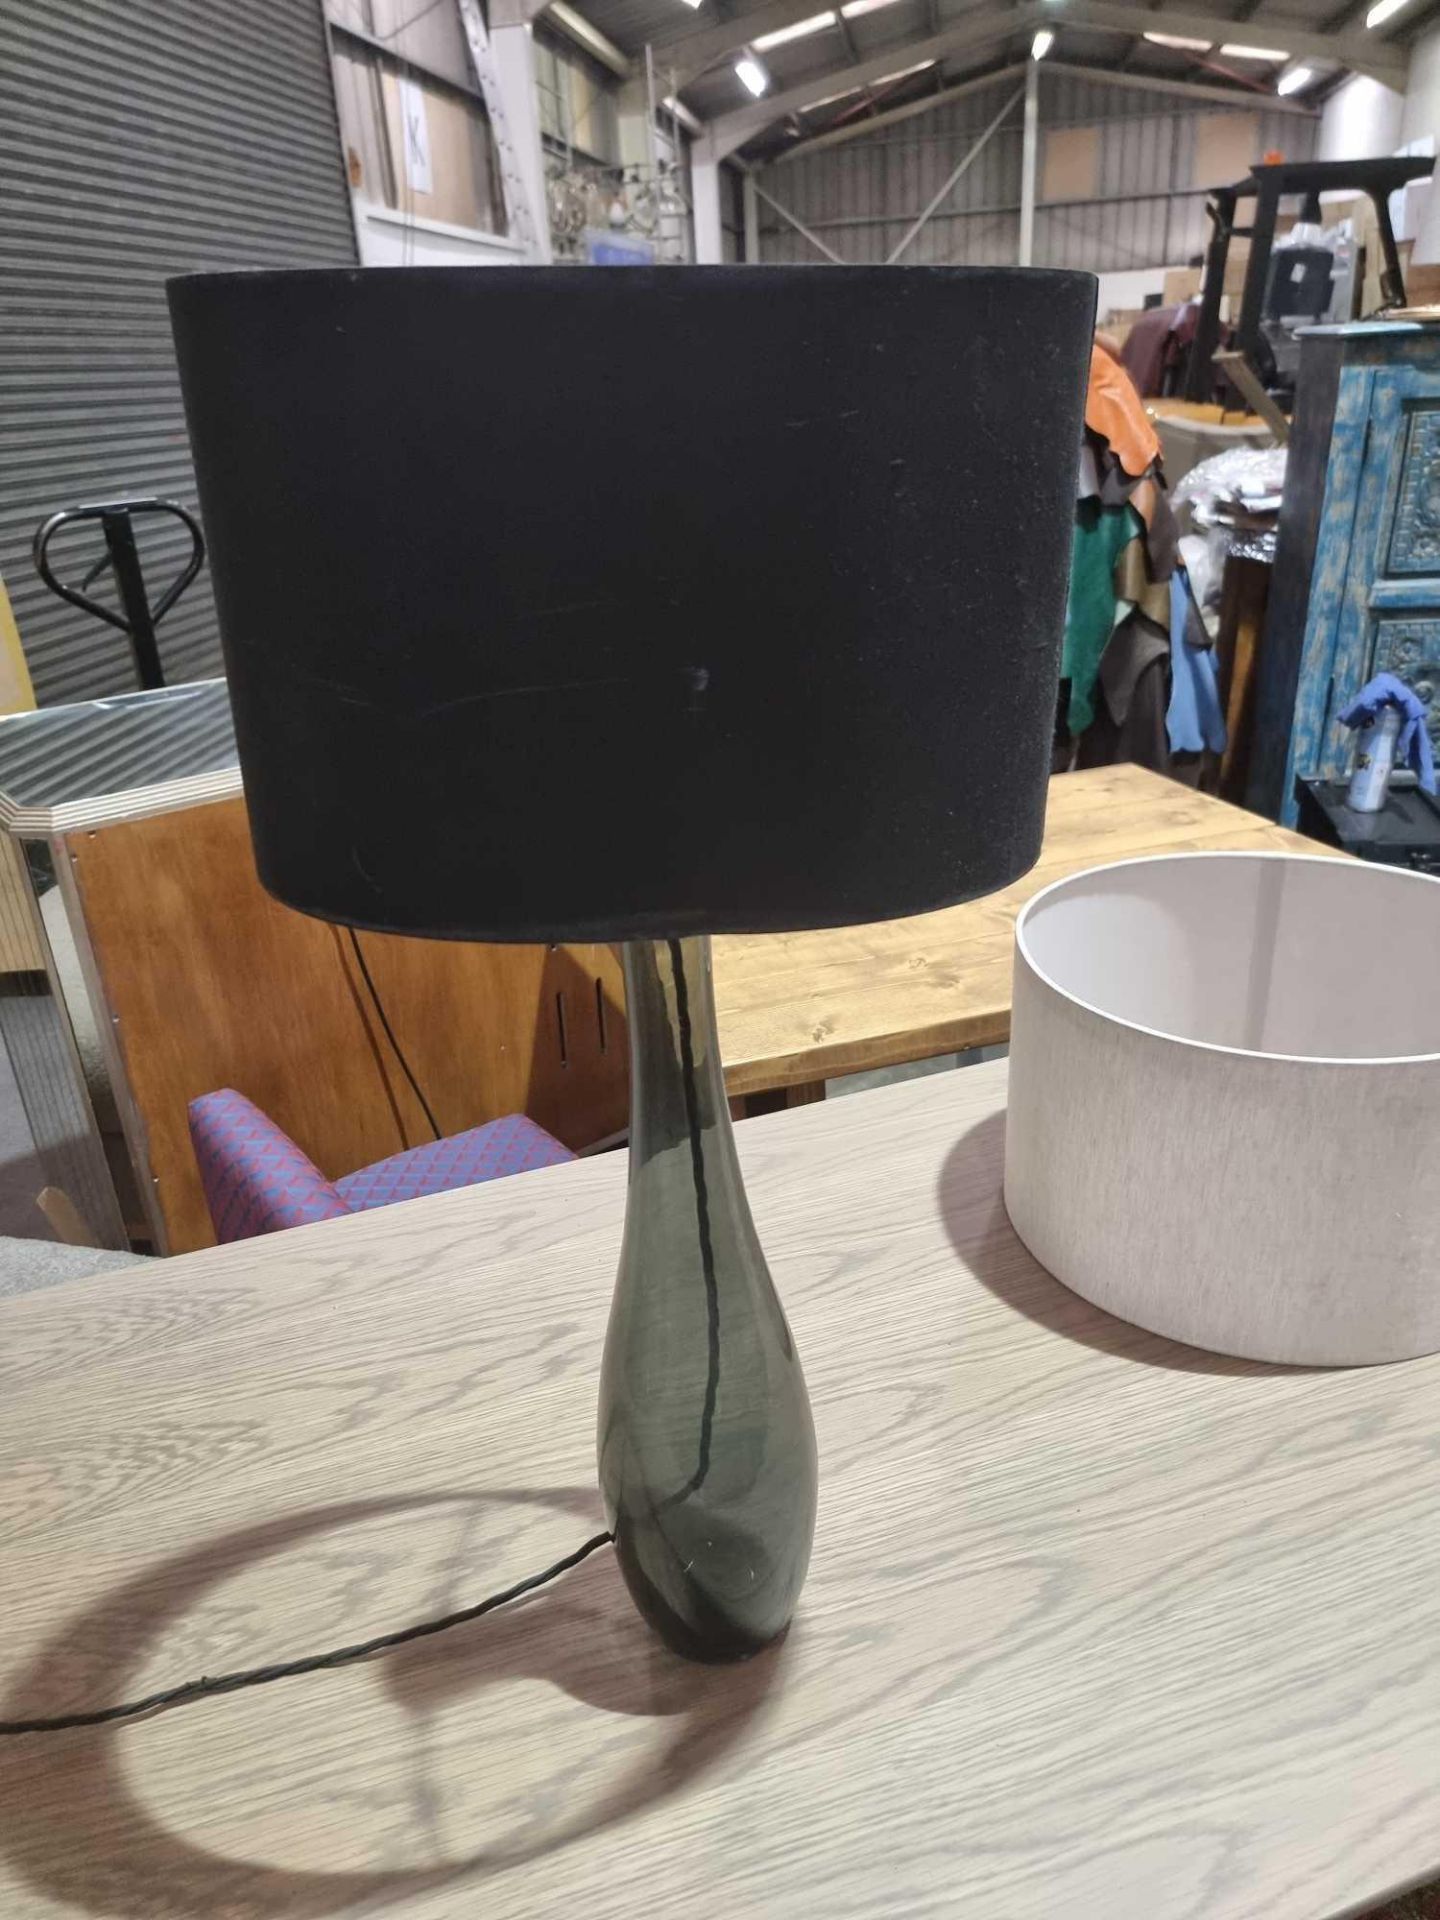 Heathfield And Co Bliss Table Lamp The Table Lamp Perfectly Demonstrates Understated Elegance. The - Image 2 of 3